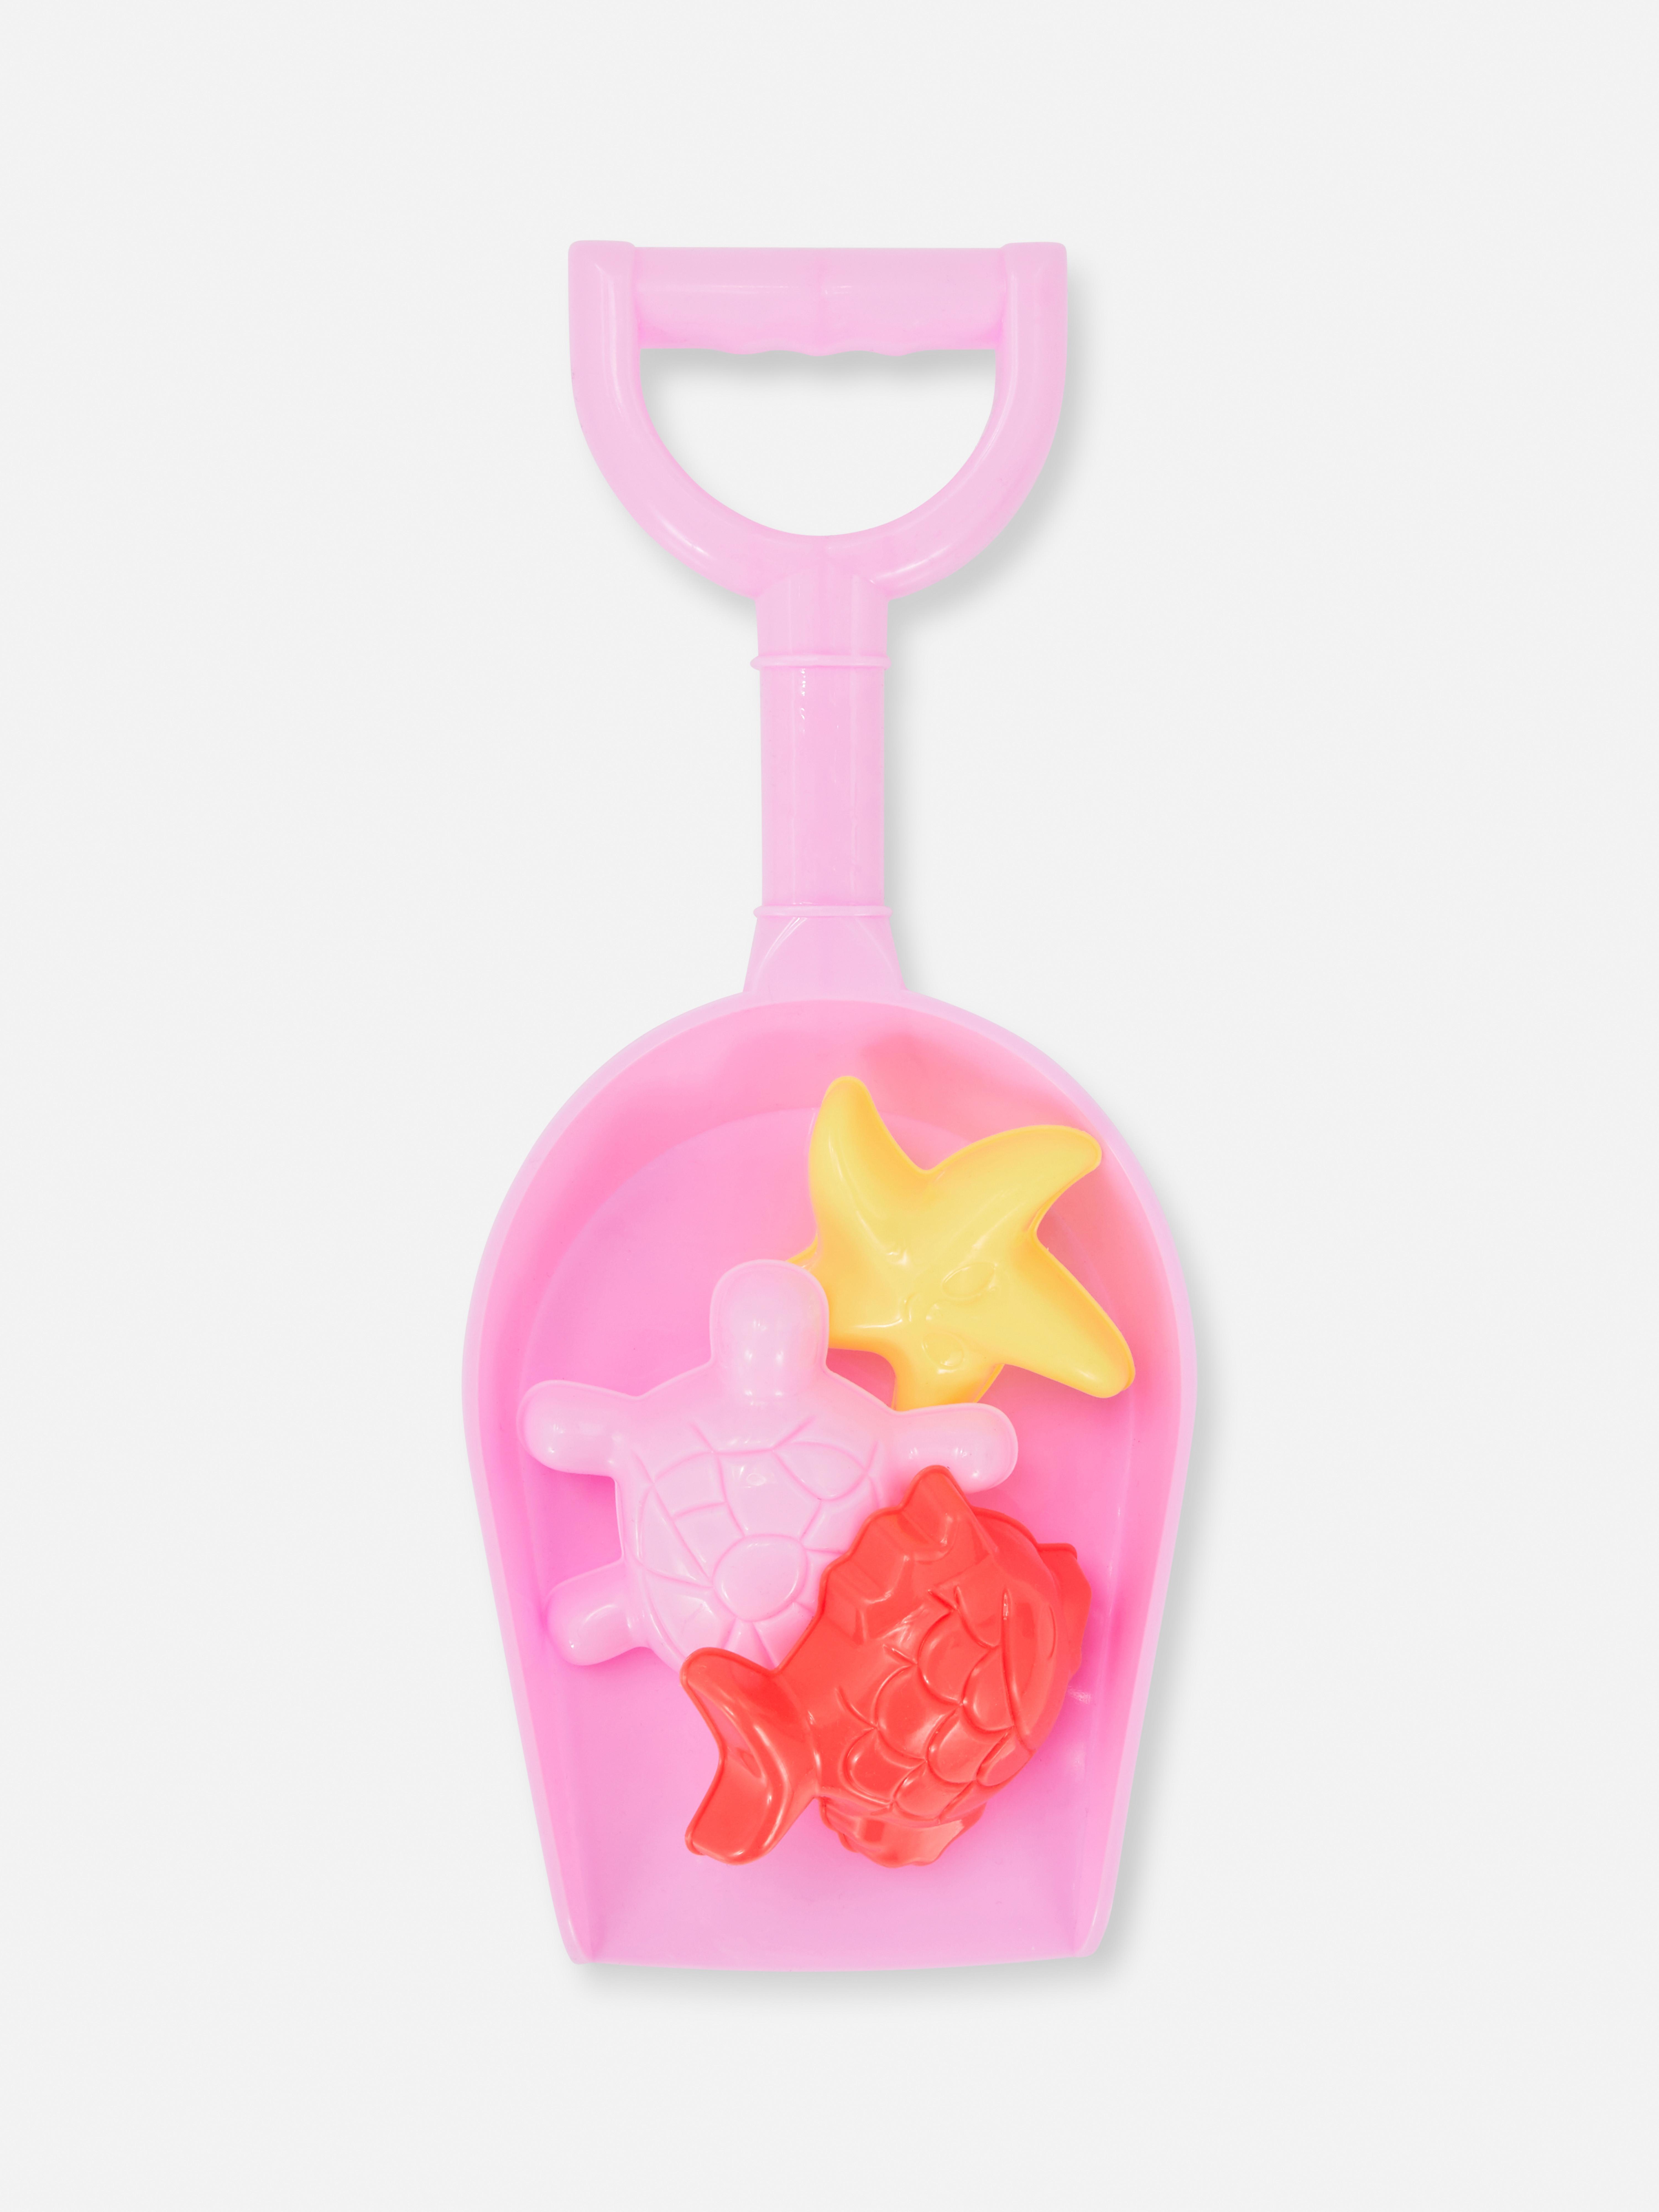 Beach Spade and Toy Set